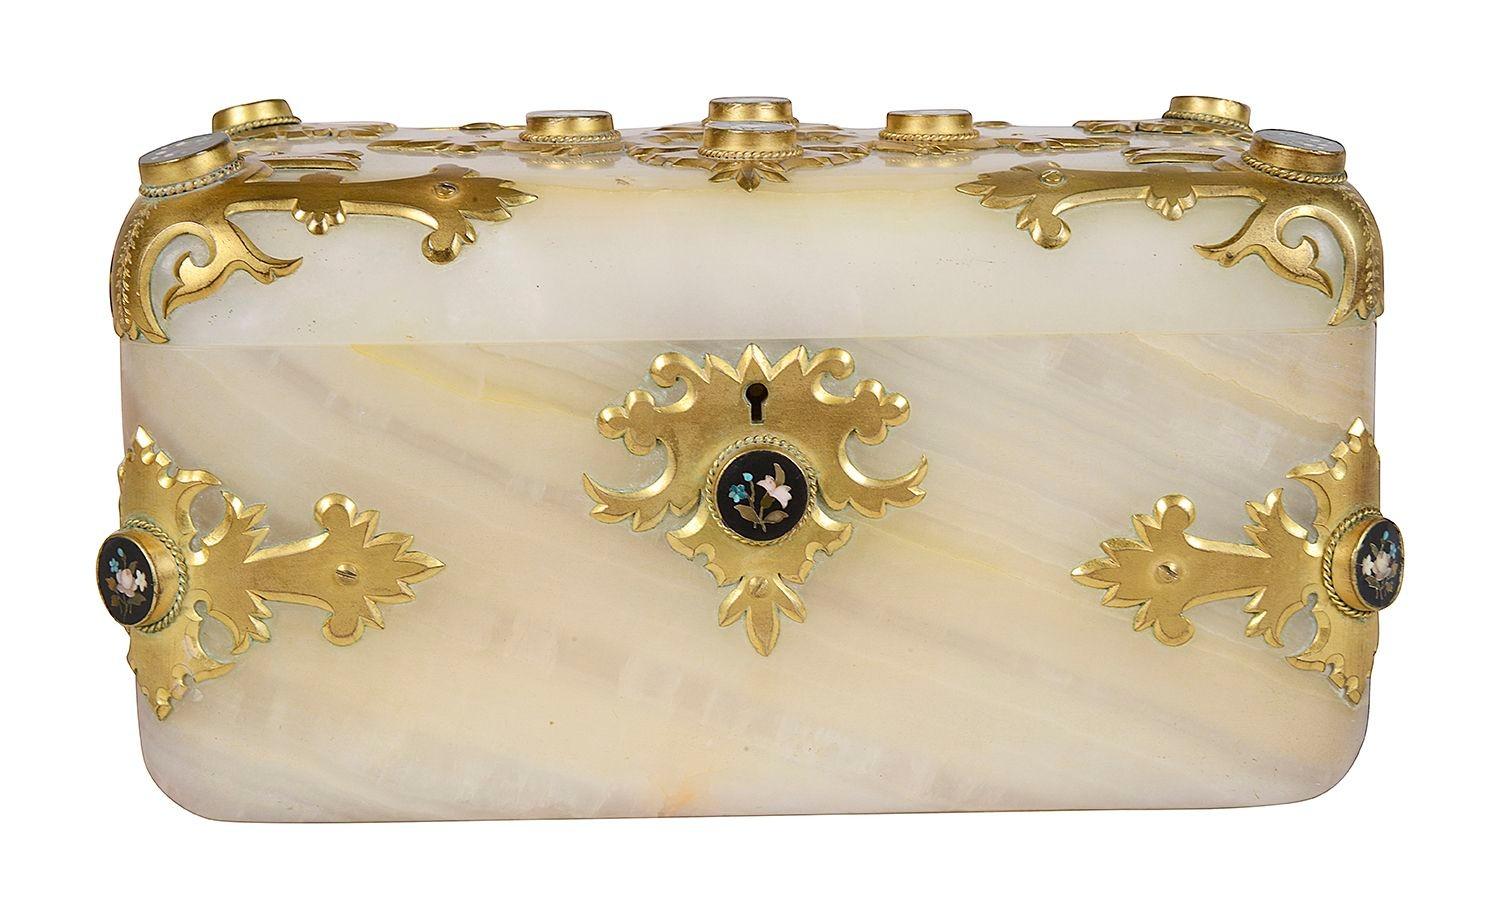 A very good quality French 19th Century onyx, ormolu mounted jewellery casket, having Pietra dura floral plaques to each corner, set into classically shaped gilded ormolu mounts.

Batch 76 c/c G9862/22 SKNZ